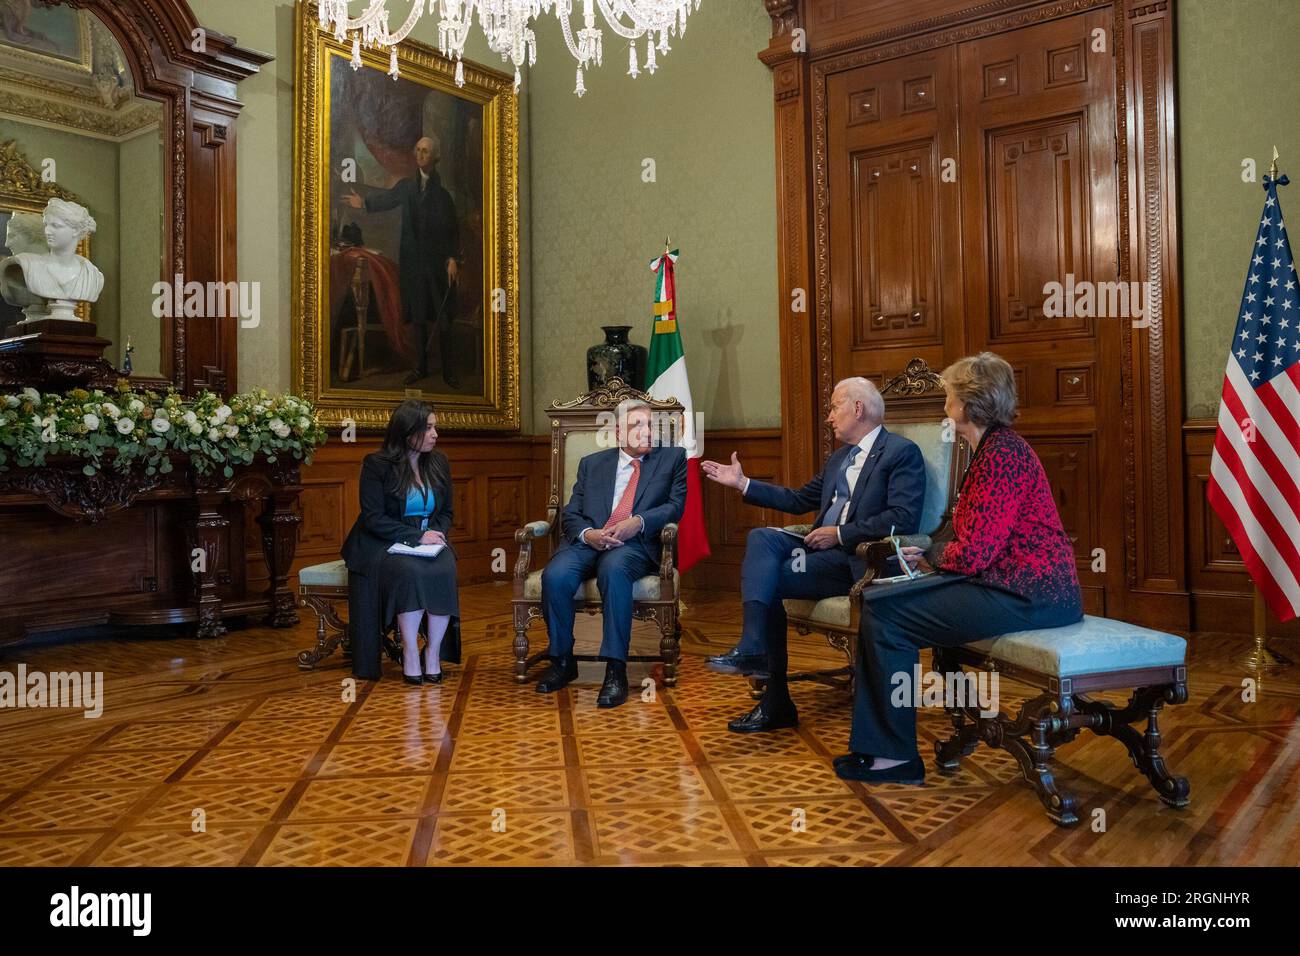 Reportage: Joe Biden, along with wife Jill Biden, visit Mexico City (January 2023) - President Joe Biden has a one-on-one private meeting with Mexican President Andres Manuel Lopez Obrador, Monday, January 9, 2023, at the National Palace in Mexico City. A replica of the iconic Gilbert Stuart portrait of George Washington hangs on the wall behind them. Stock Photo